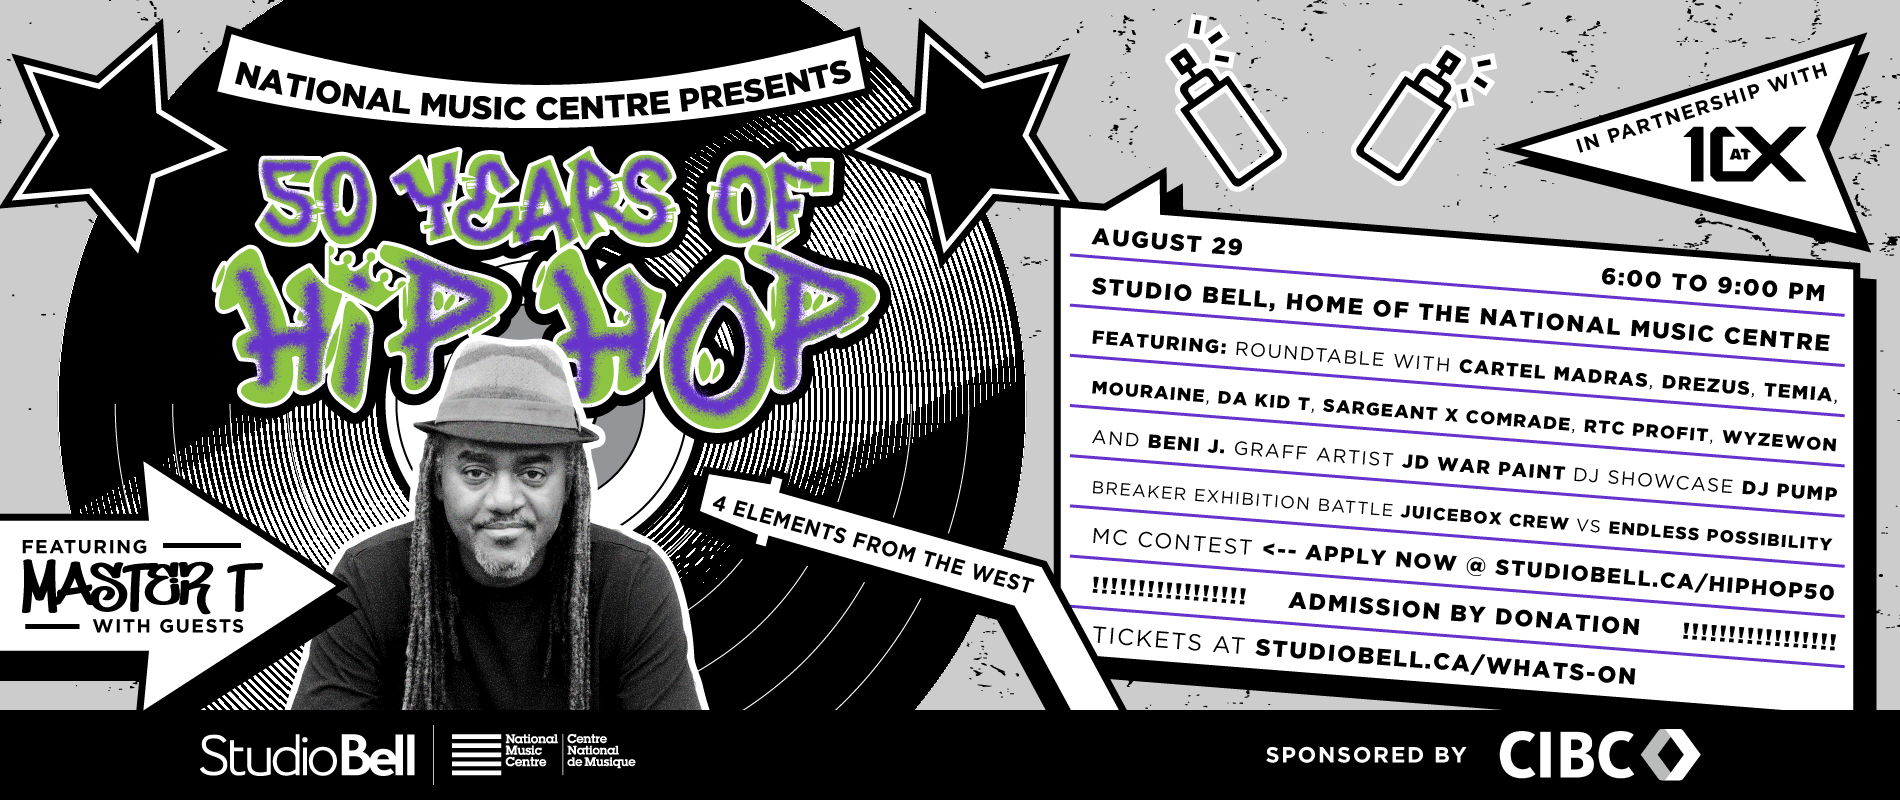 National Music Centre Celebrates 50 Years of Hip-Hop with Master T and Guests on August 29